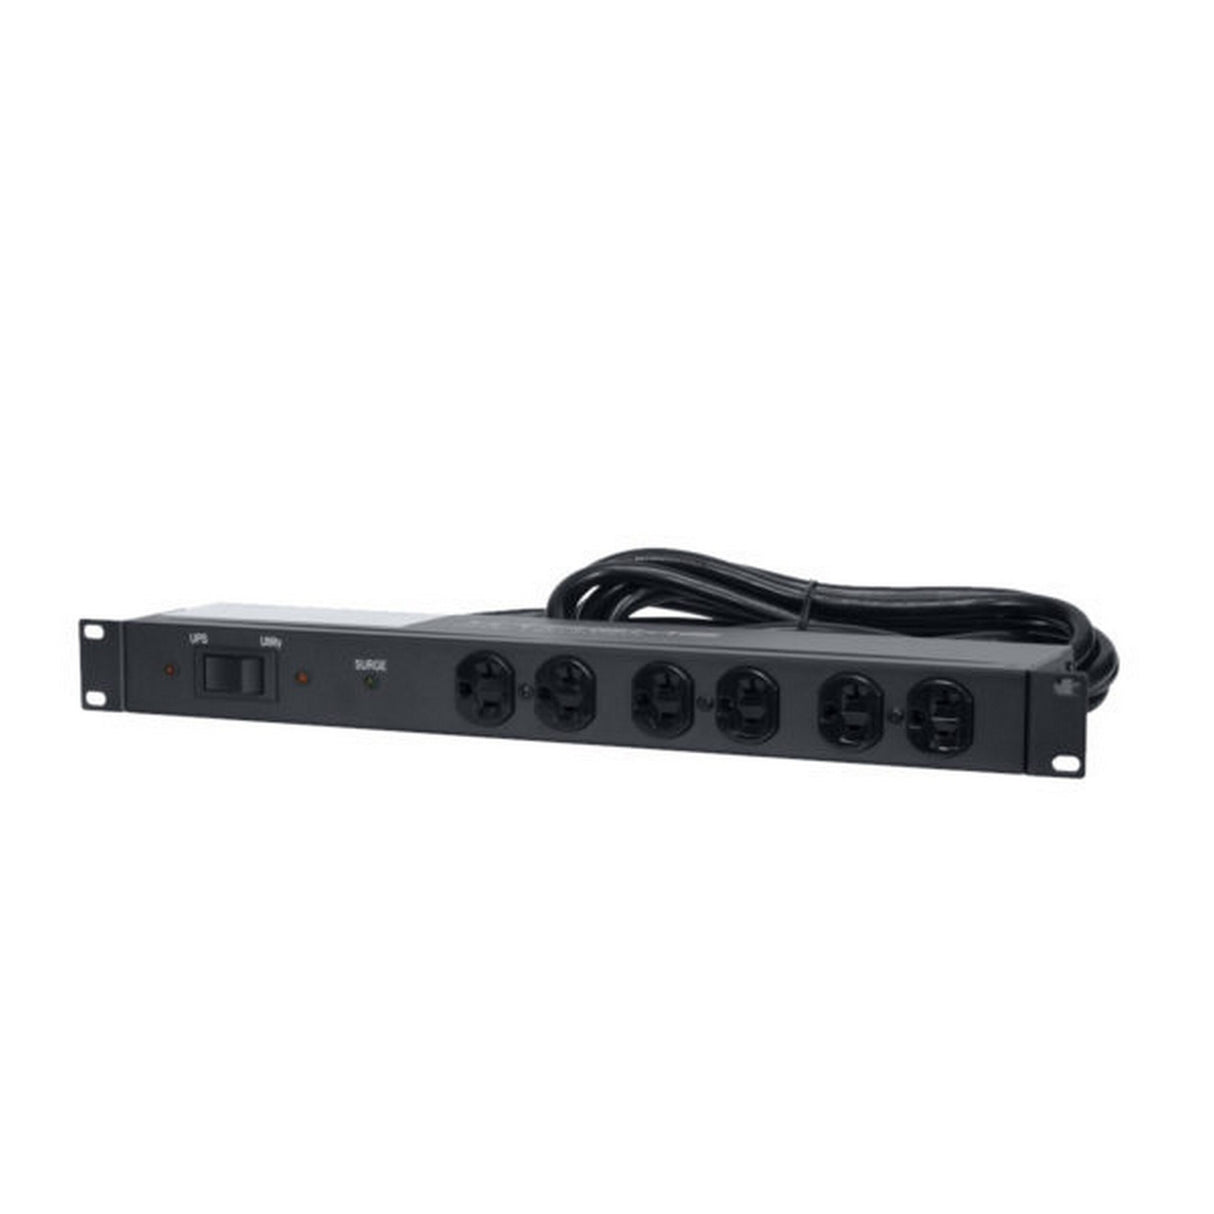 Lowell UPS-XBDM-20RCD Corded Bypass Module for UPS8-2000, UPS82200, or UPS9-2000